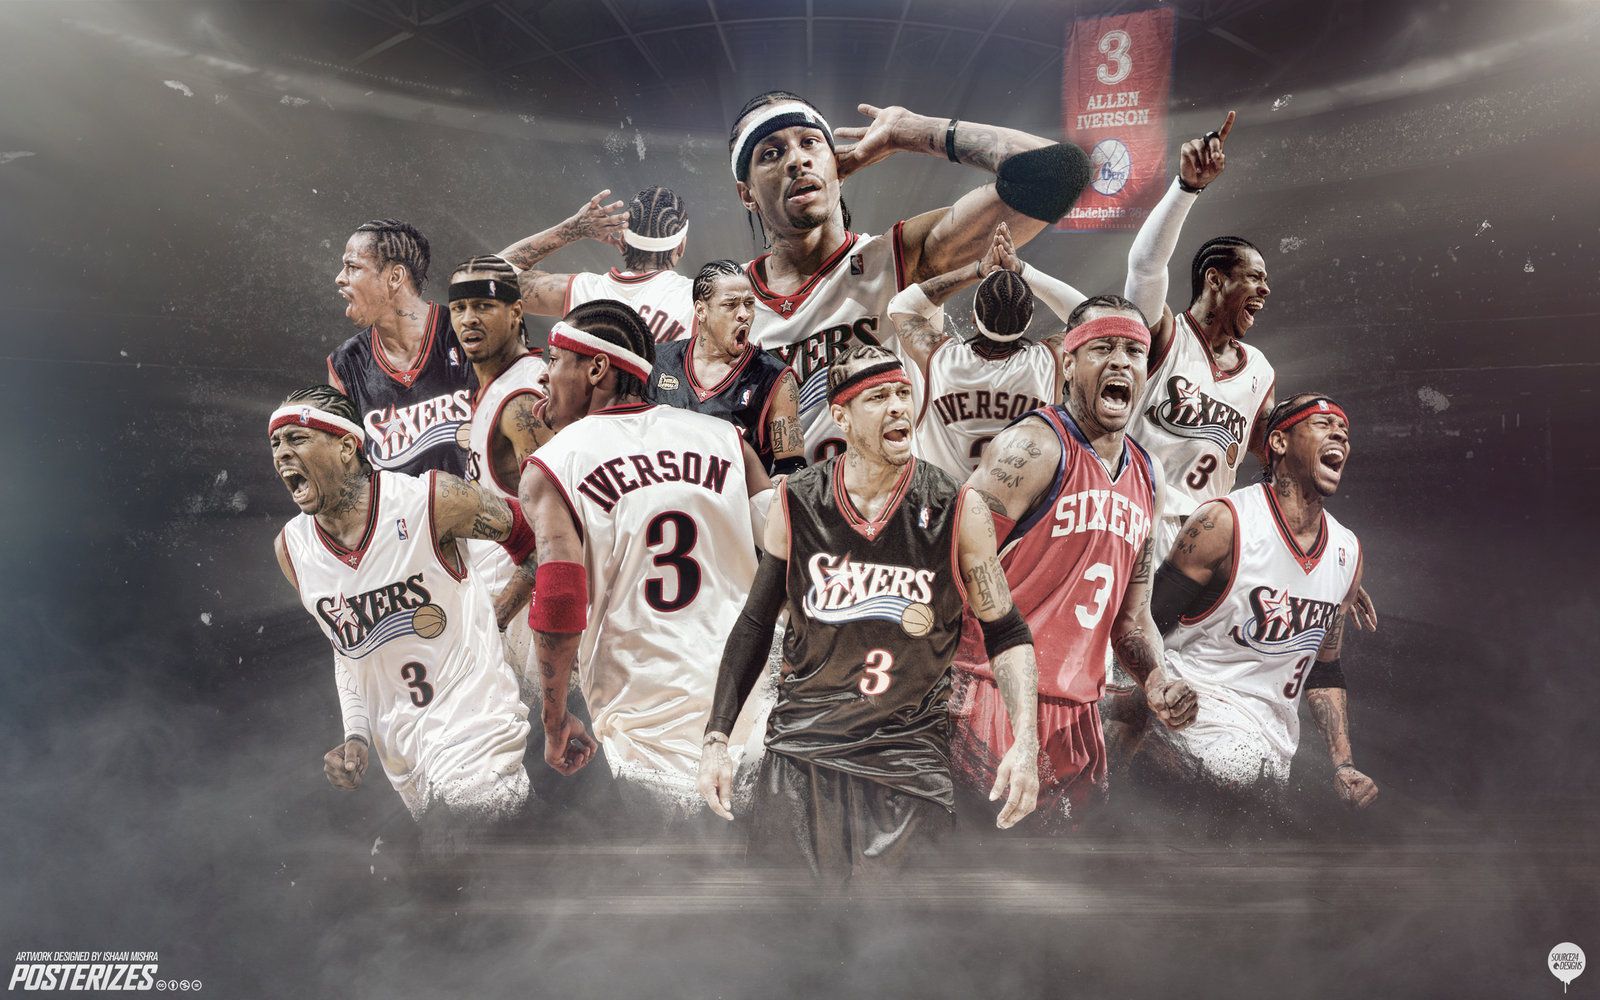 Allen Iverson Mobile Phone Wallpapers · Free Download